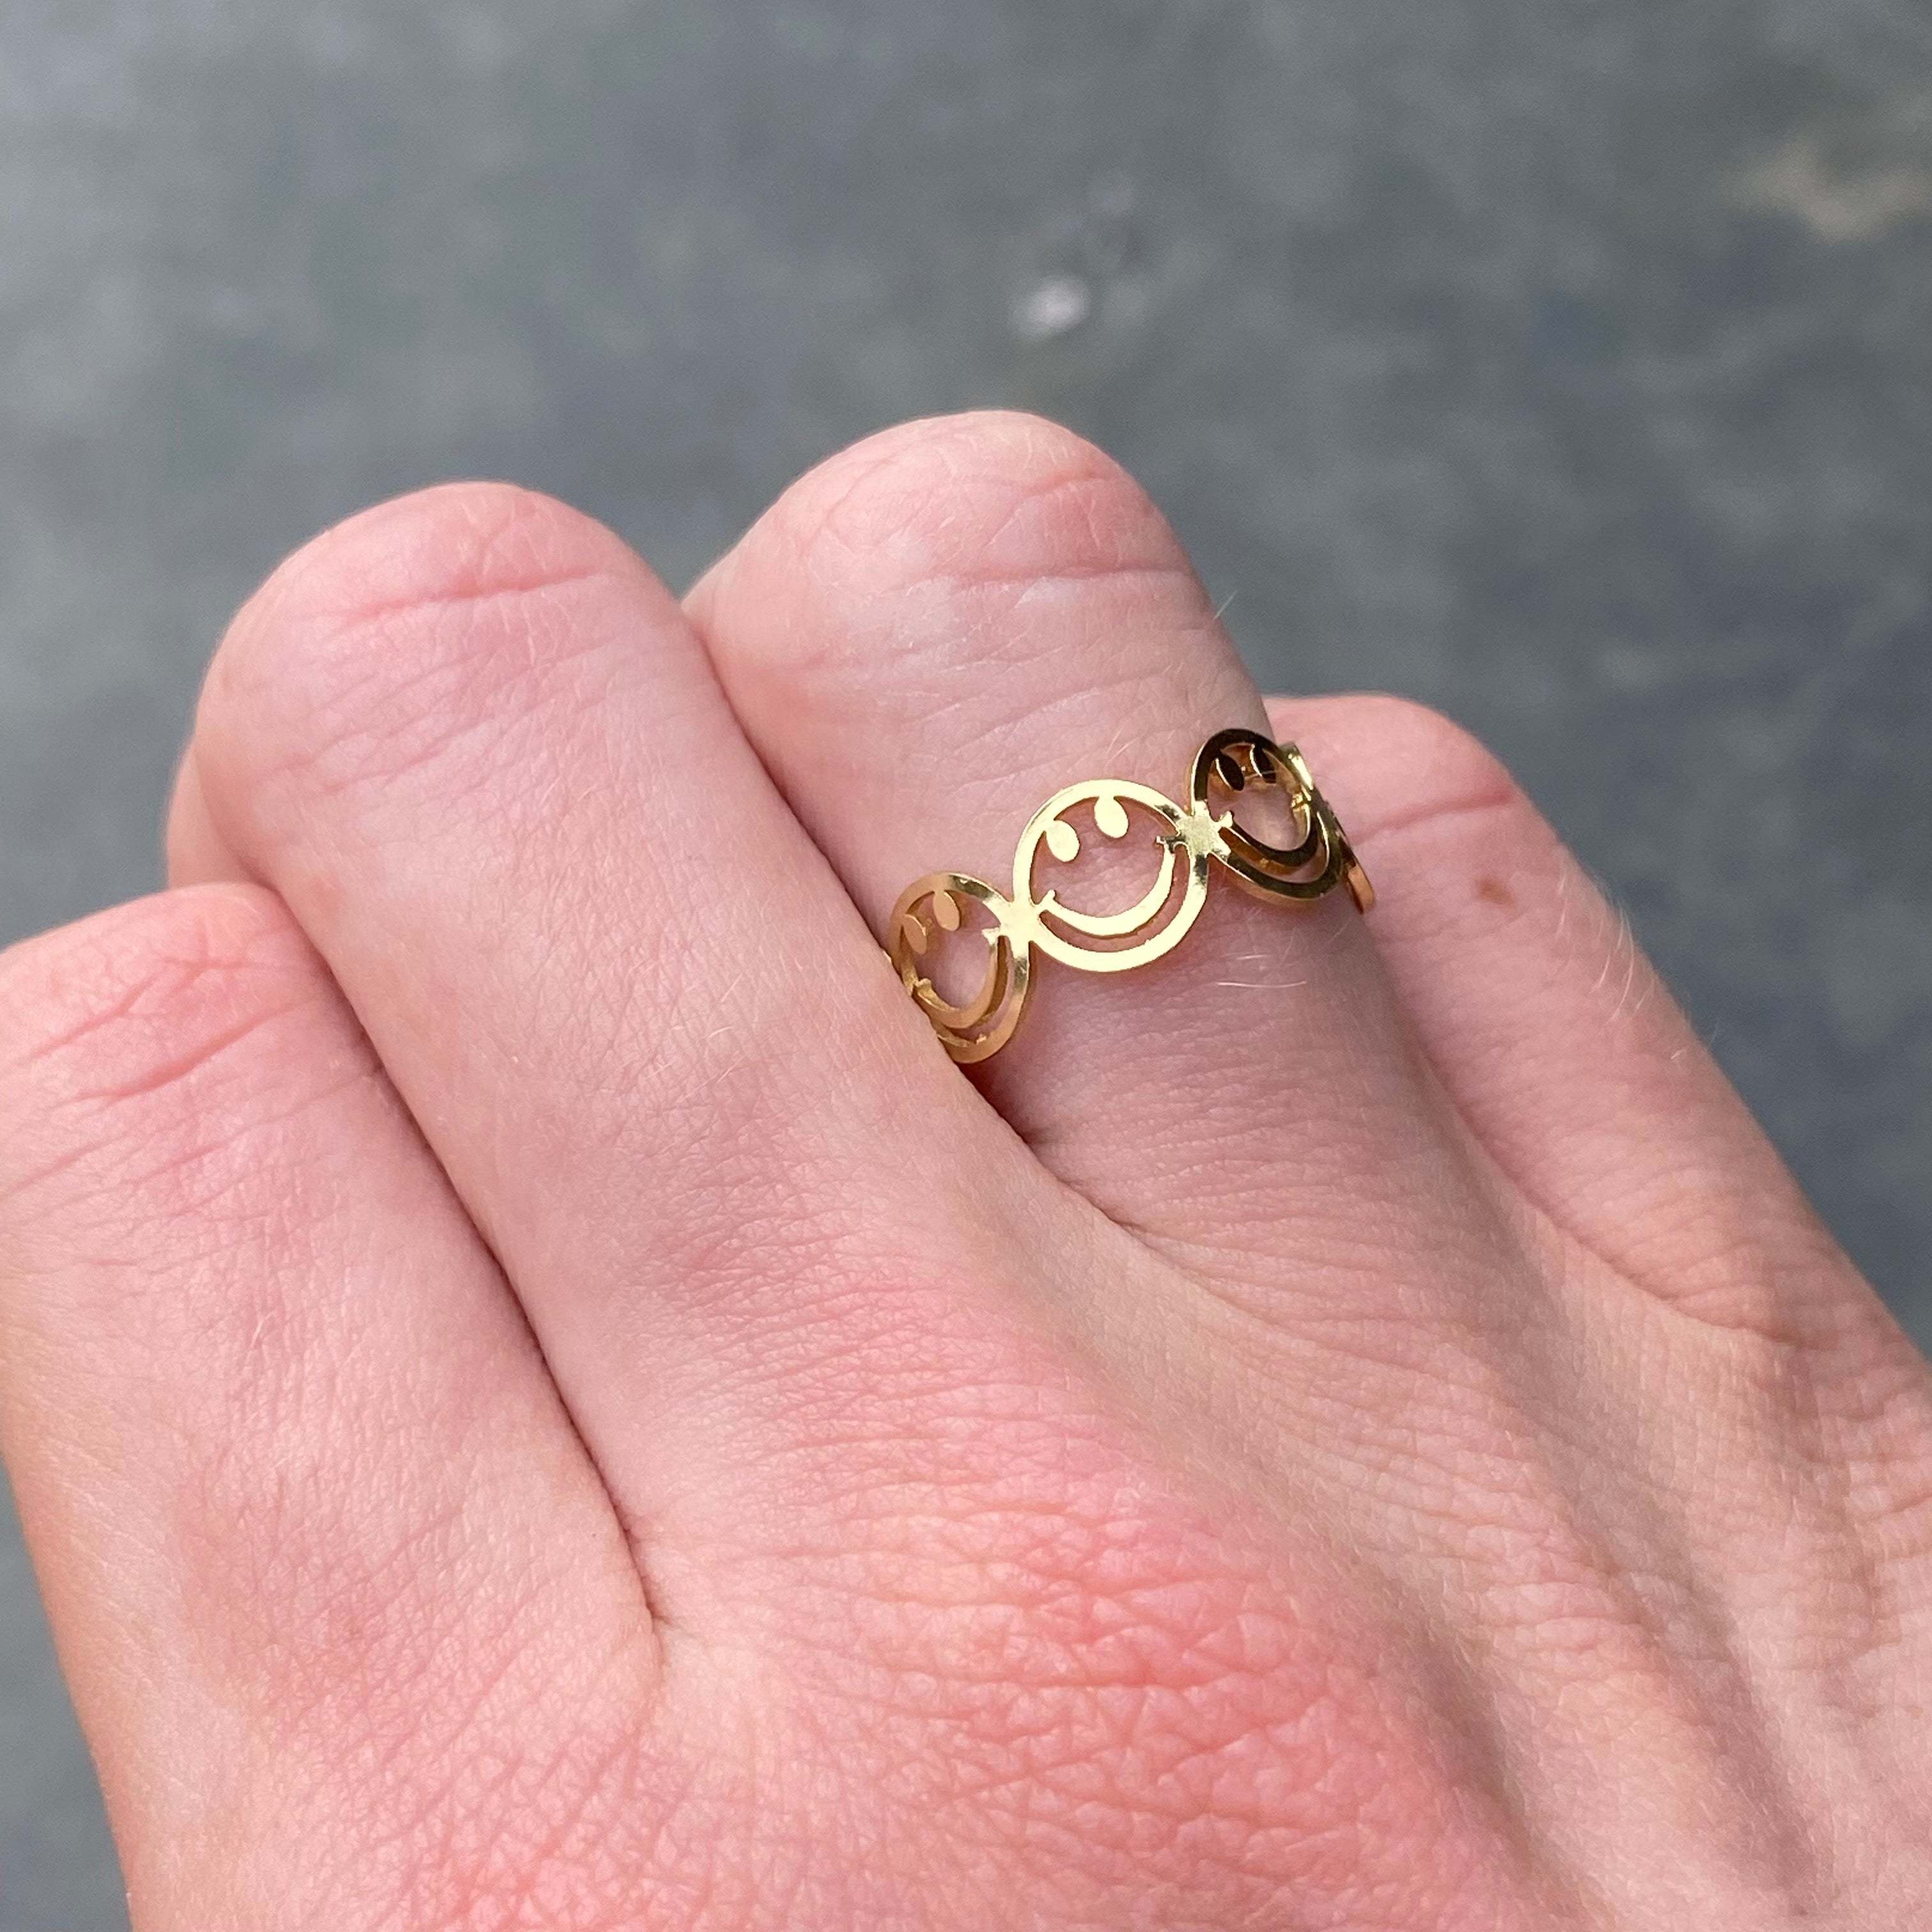 Adjustable Smiley Face Ring Gold